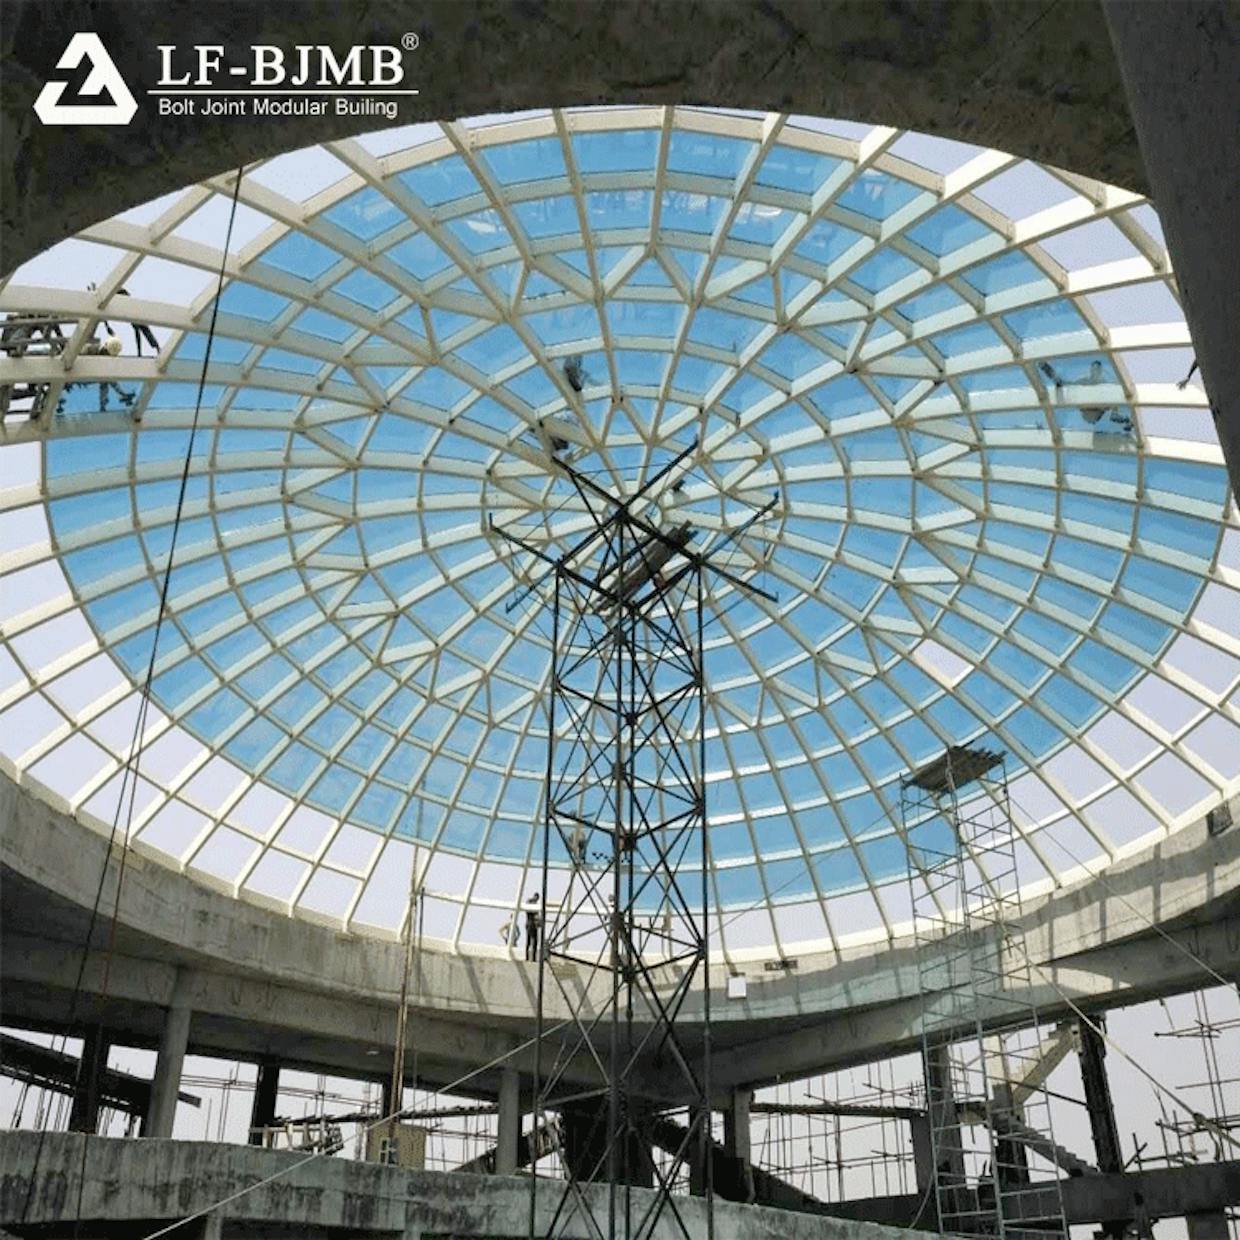 glass dome roof